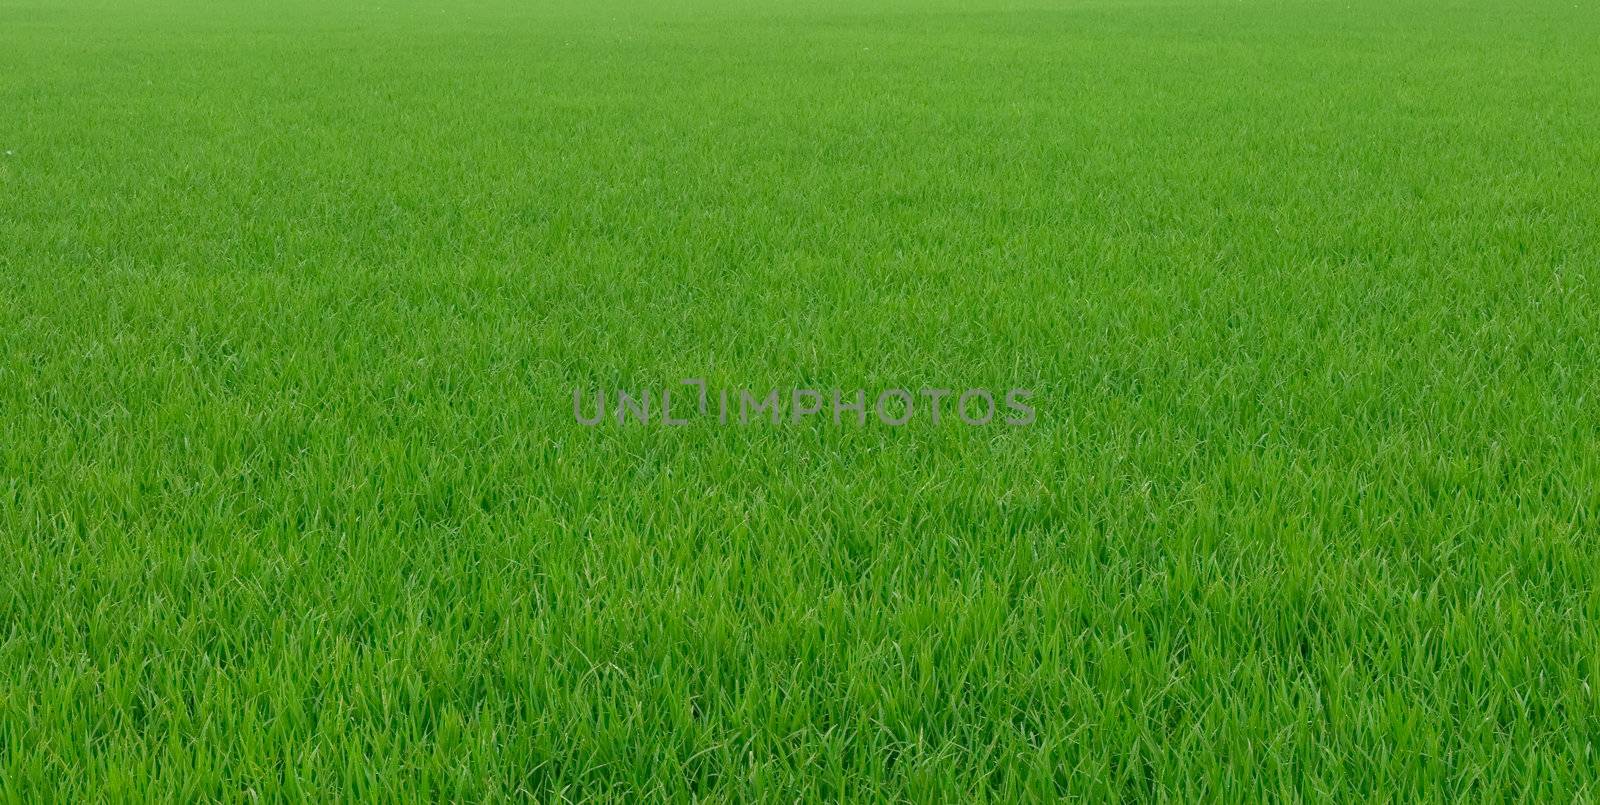 It is a green new rice land background.